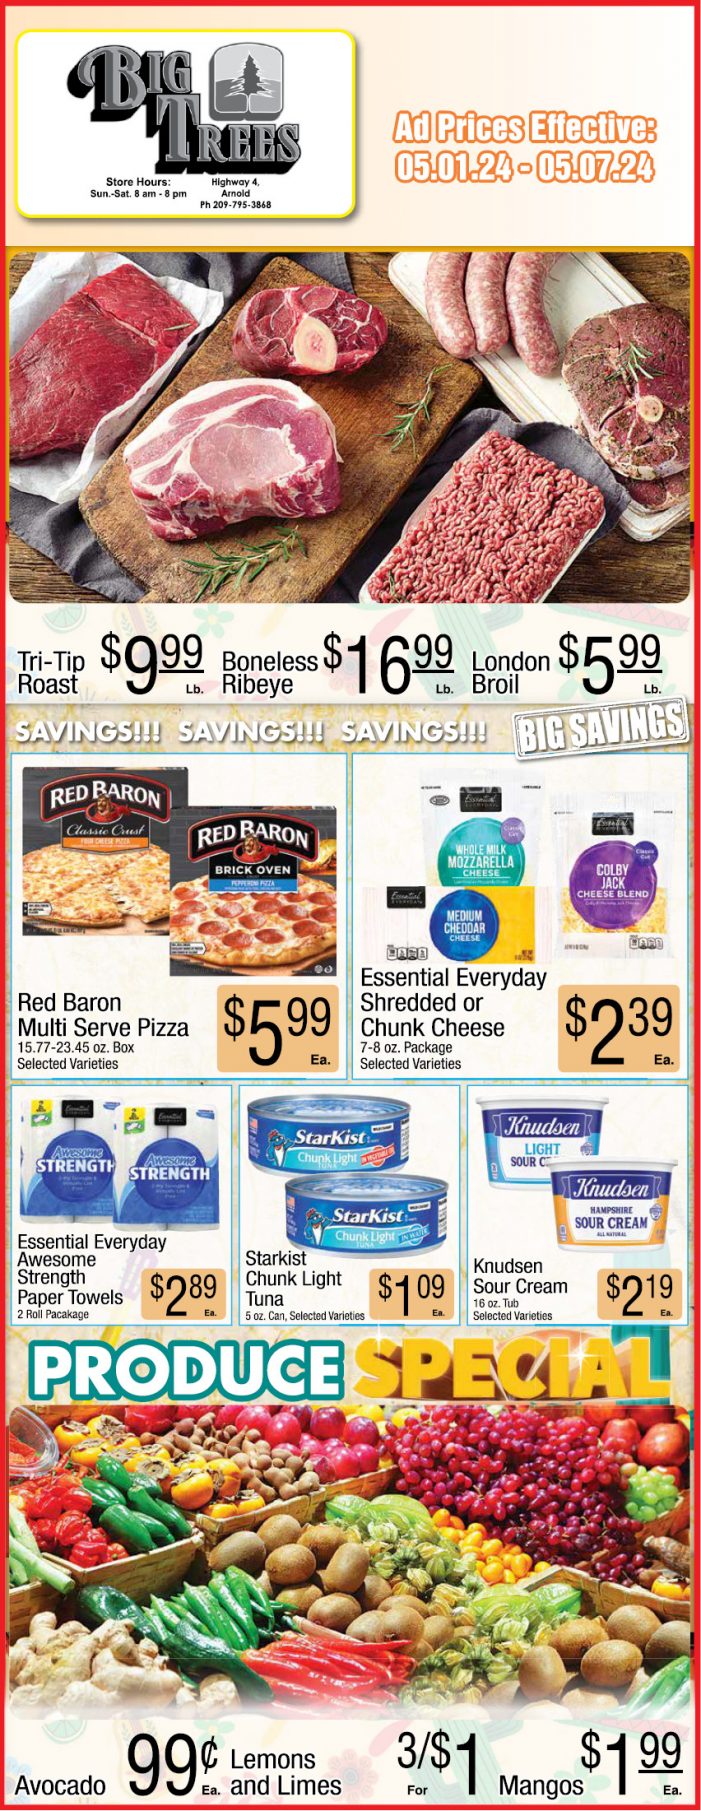 Big Trees Market Weekly Ad, Grocery, Produce, Meat & Deli Specials Through May7th! Shop Local & Save!